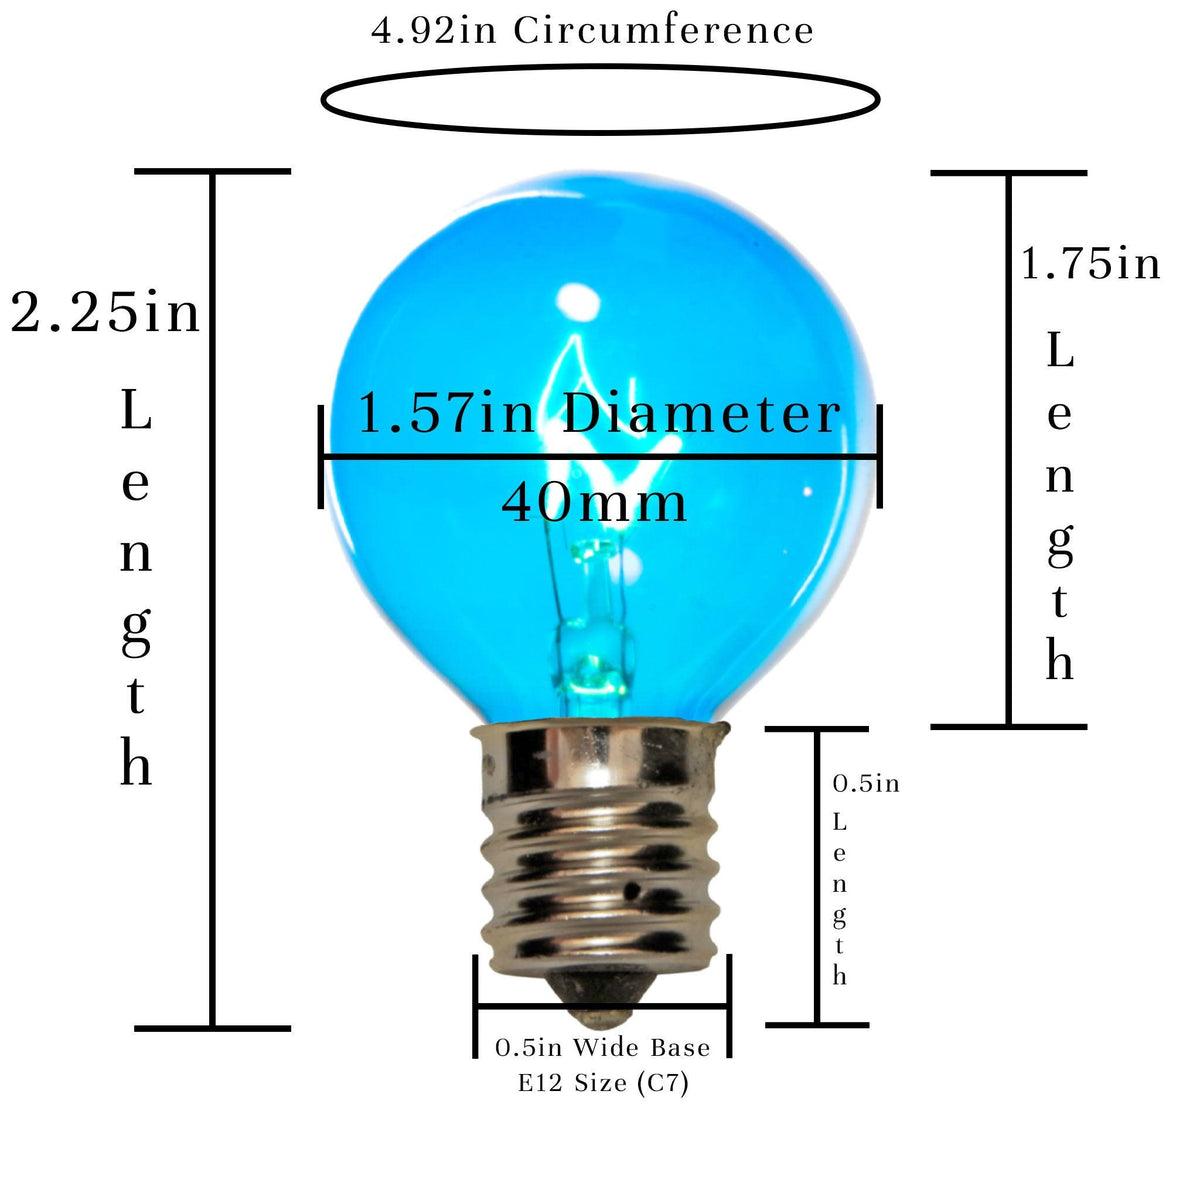 Size of a G40 Light Bulb available for sale on Leedisplay.com